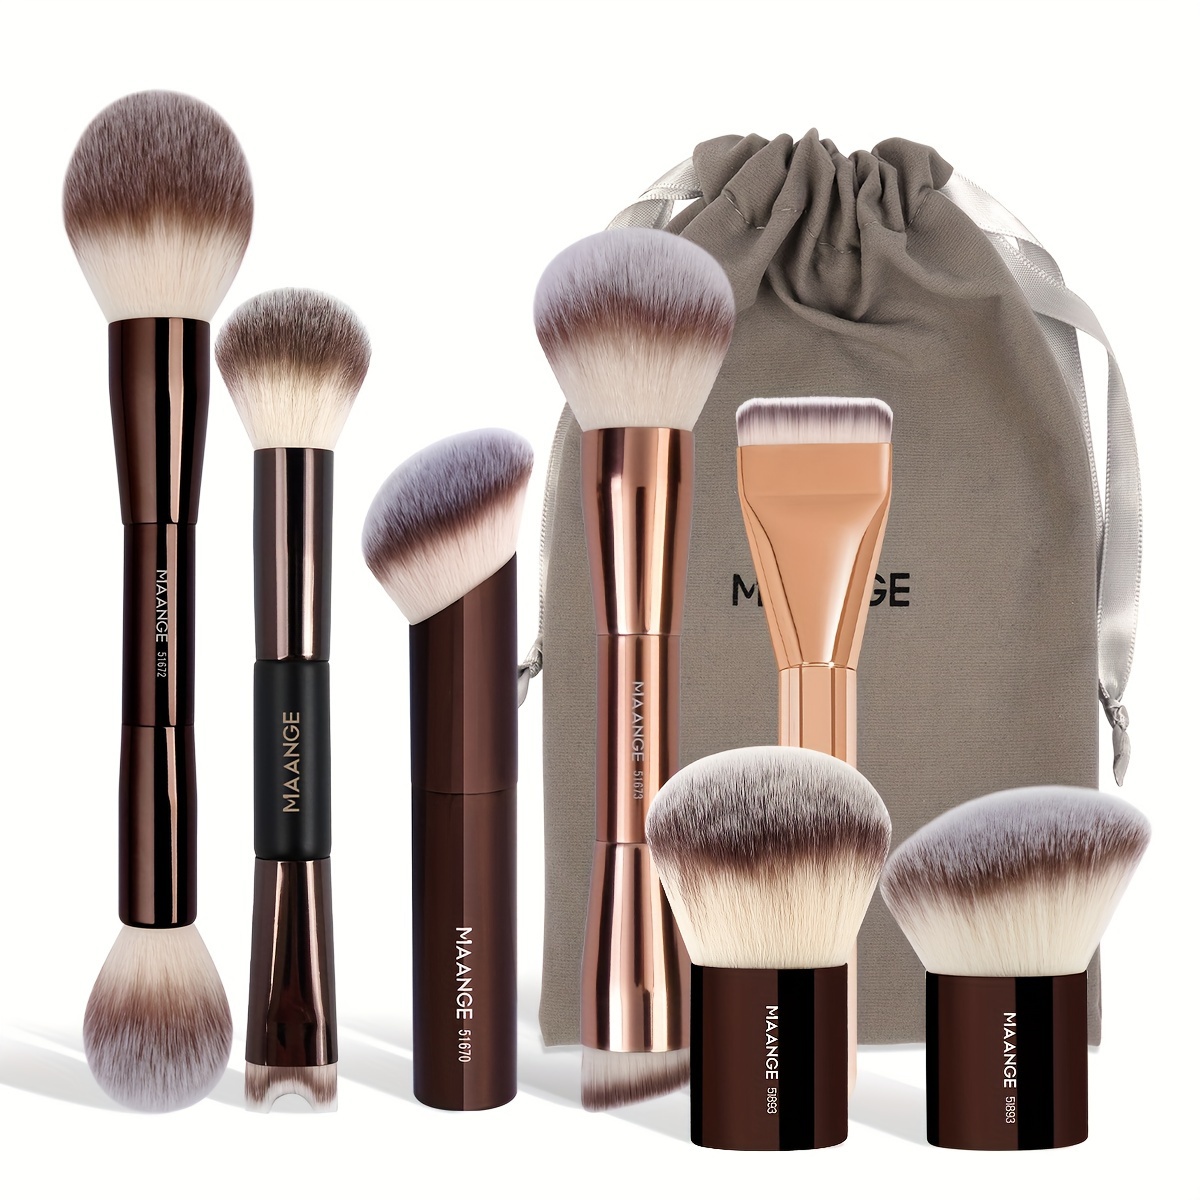 

Maange 7-piece Makeup Brush Set With Soft Nylon Bristles - Includes Foundation, Blush, Contour Brushes & Velvet Pouch - Perfect For Beginners & Travel